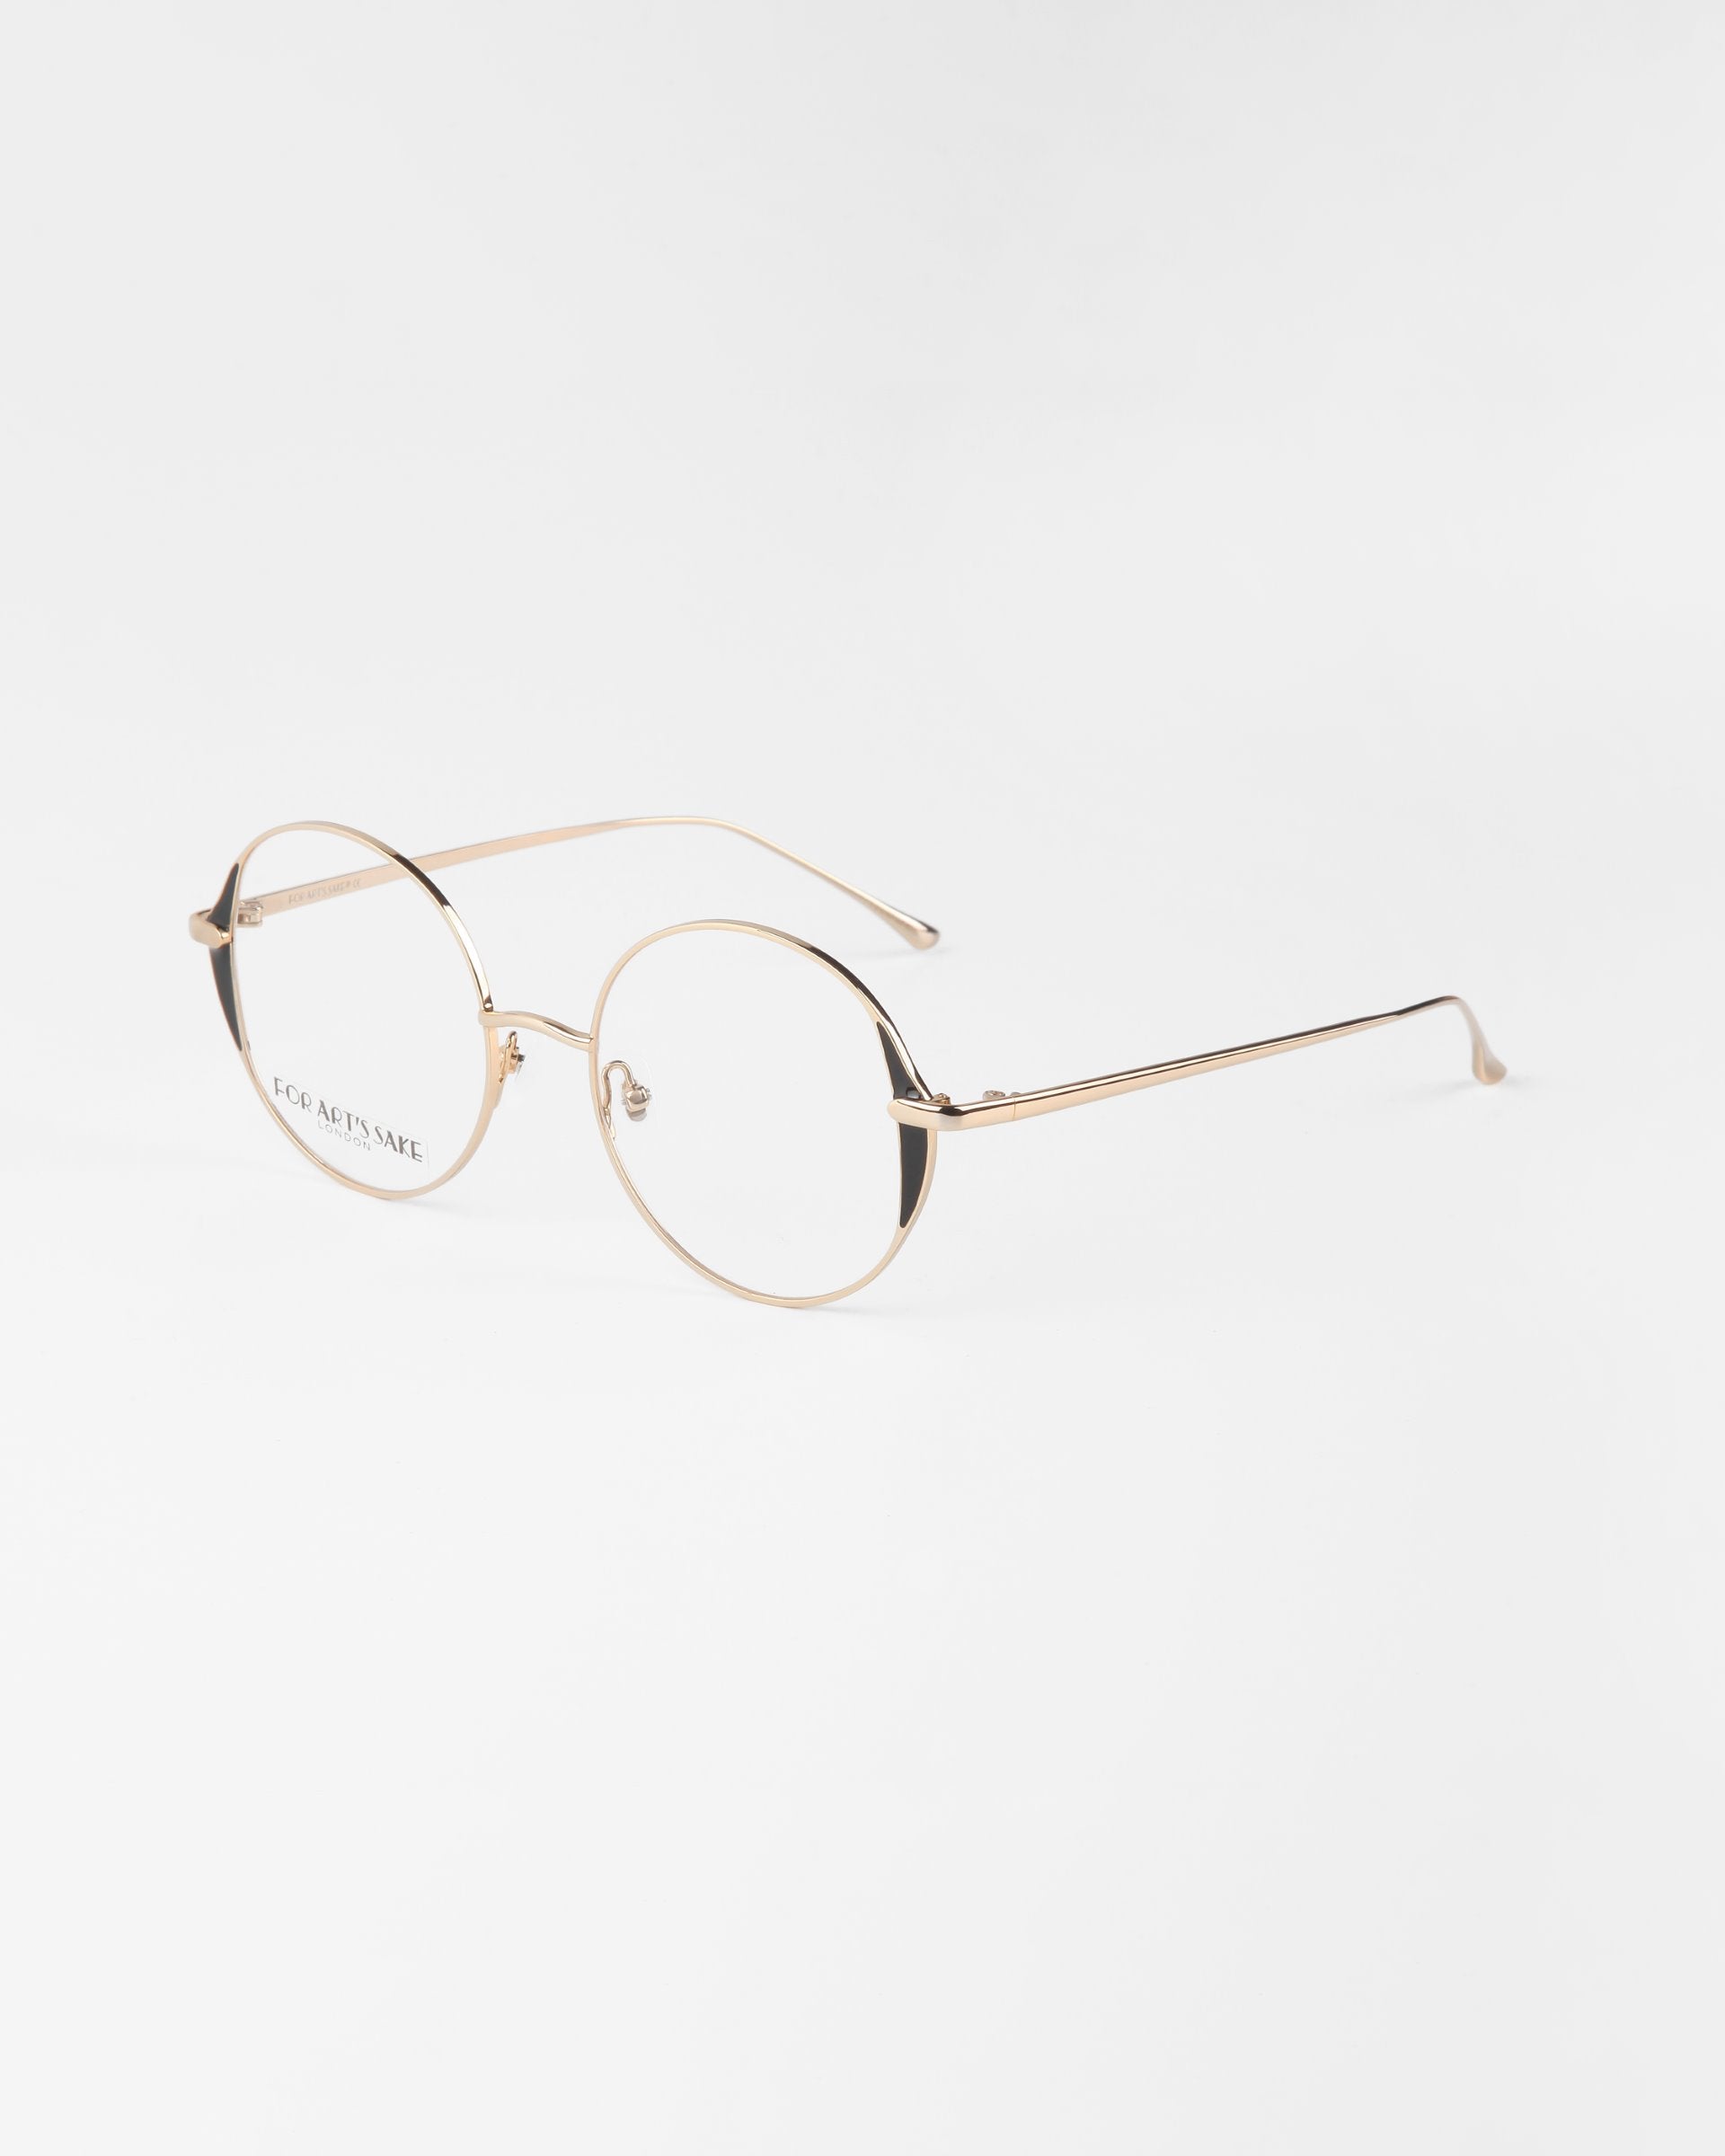 A pair of round, gold-rimmed eyeglasses with thin metal frames and clear lenses on a white background. The delicate design, featuring 18-karat gold plating, includes slim temples and bridge, giving the glasses a minimalist and elegant appearance. These are the Kos eyeglasses by For Art's Sake®.